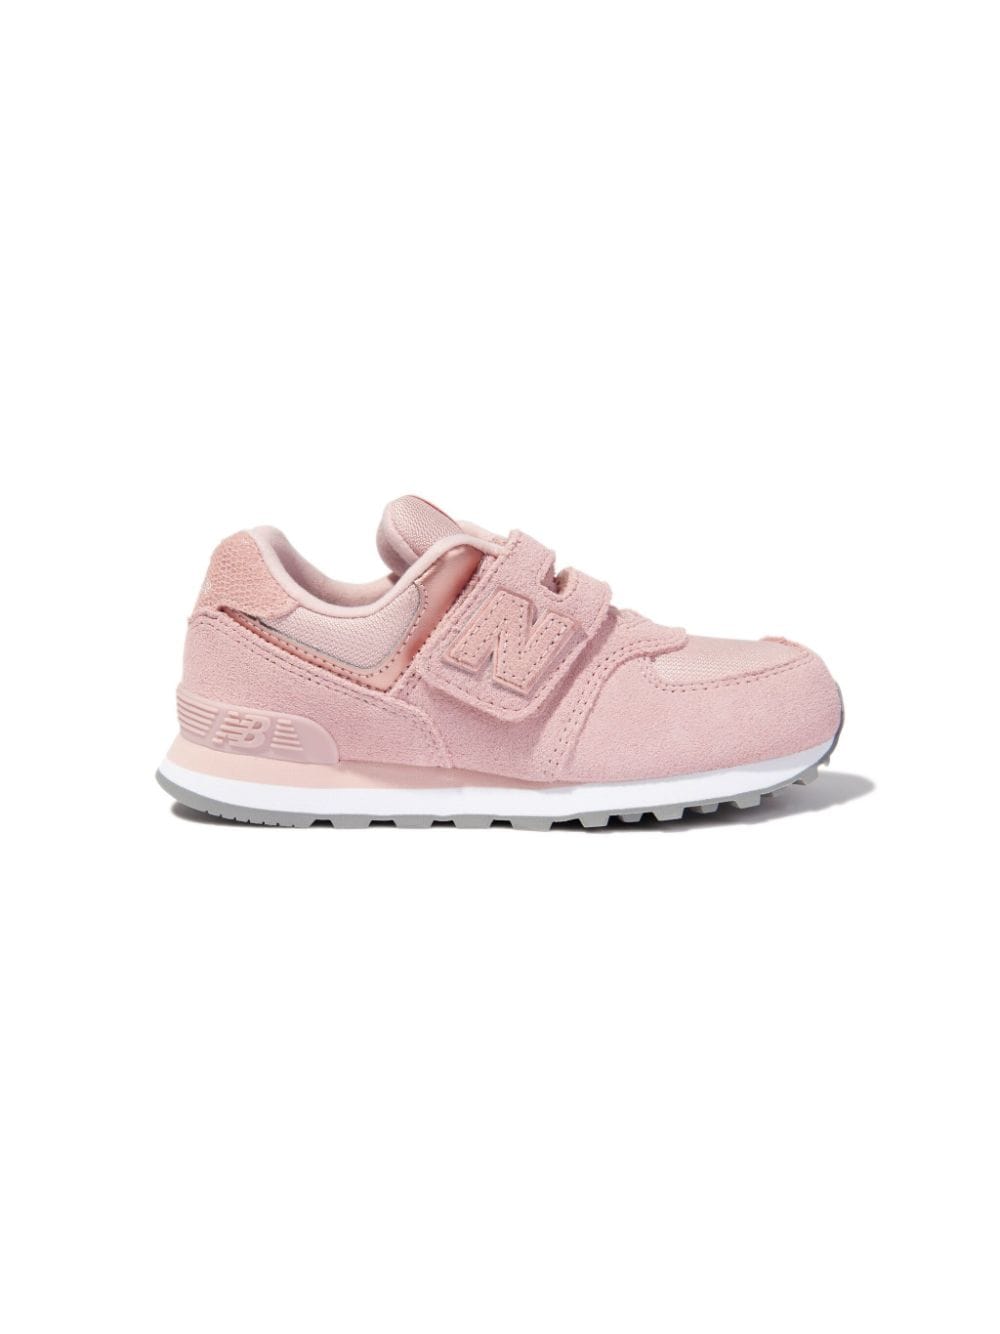 New Balance Kids 393 V1 touch-strap suede sneakers - Rosa